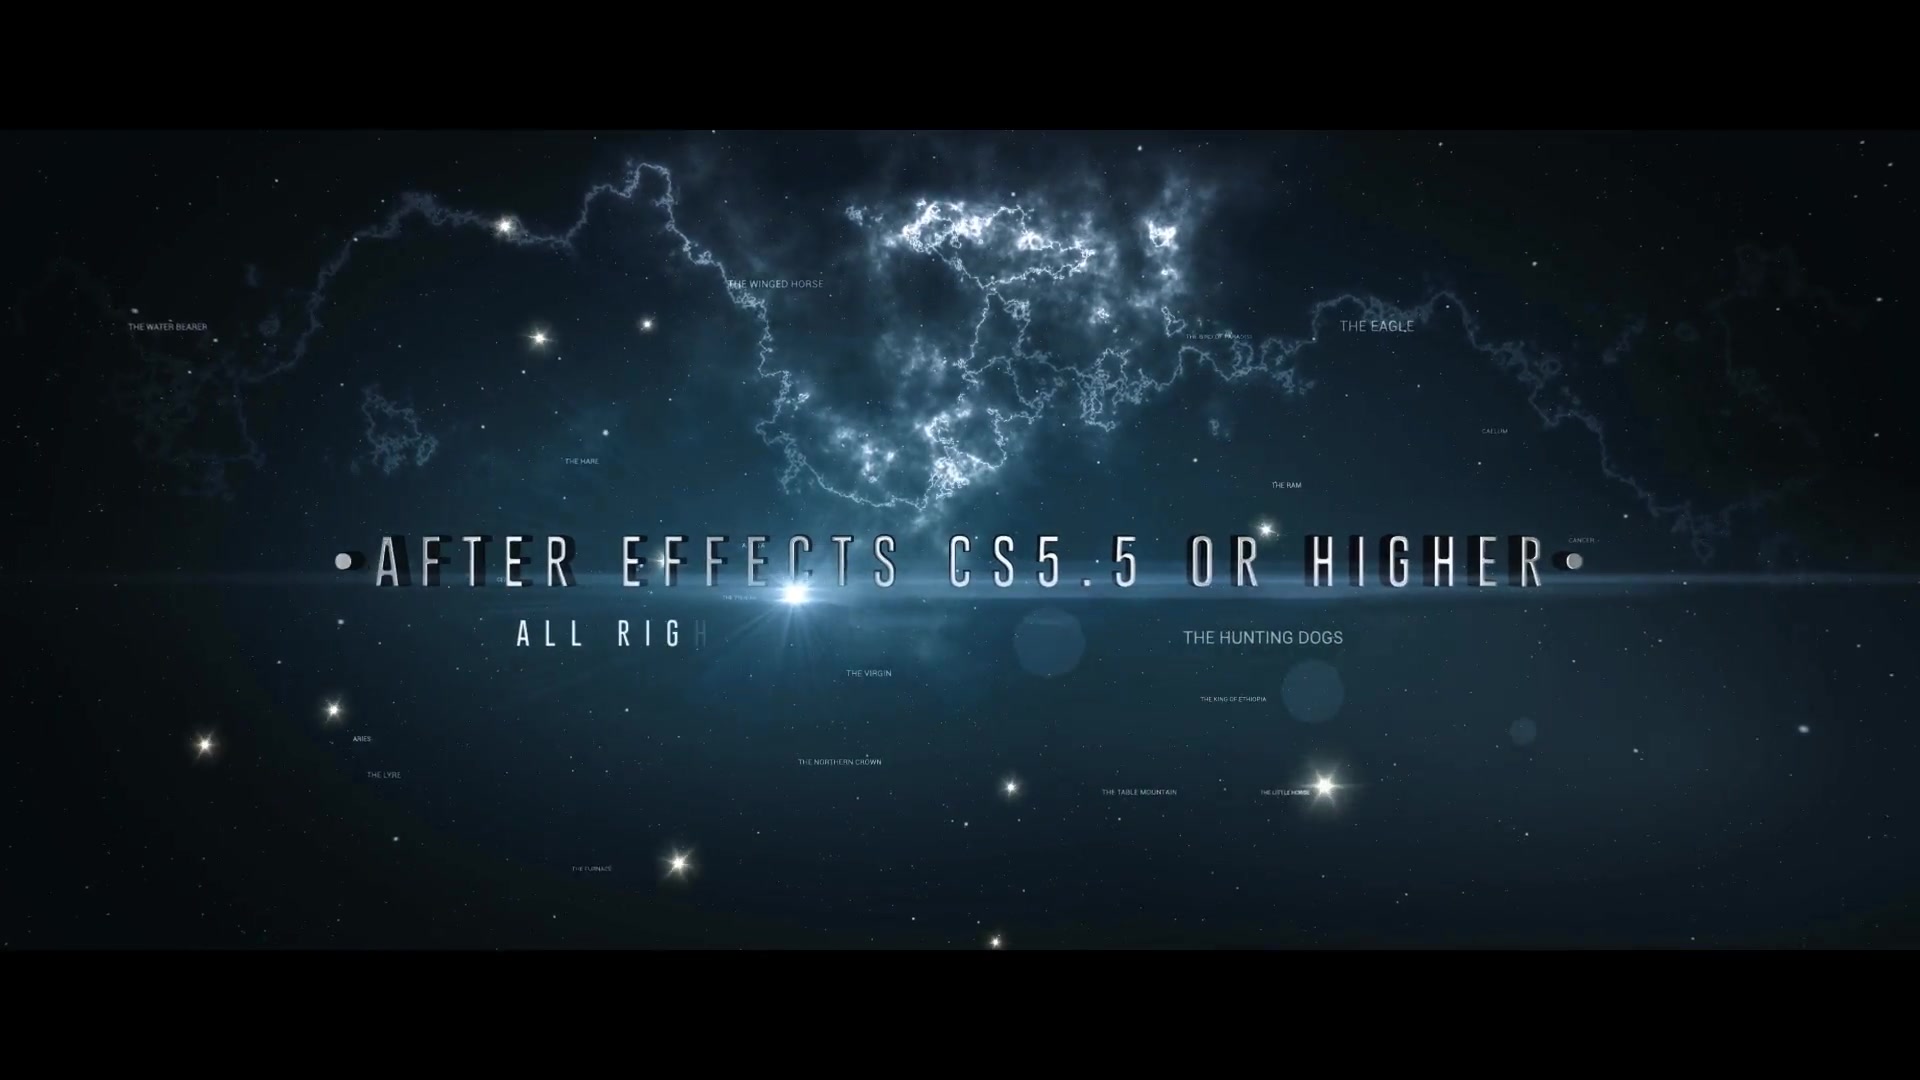 Space Trailer - Download Videohive 20193890